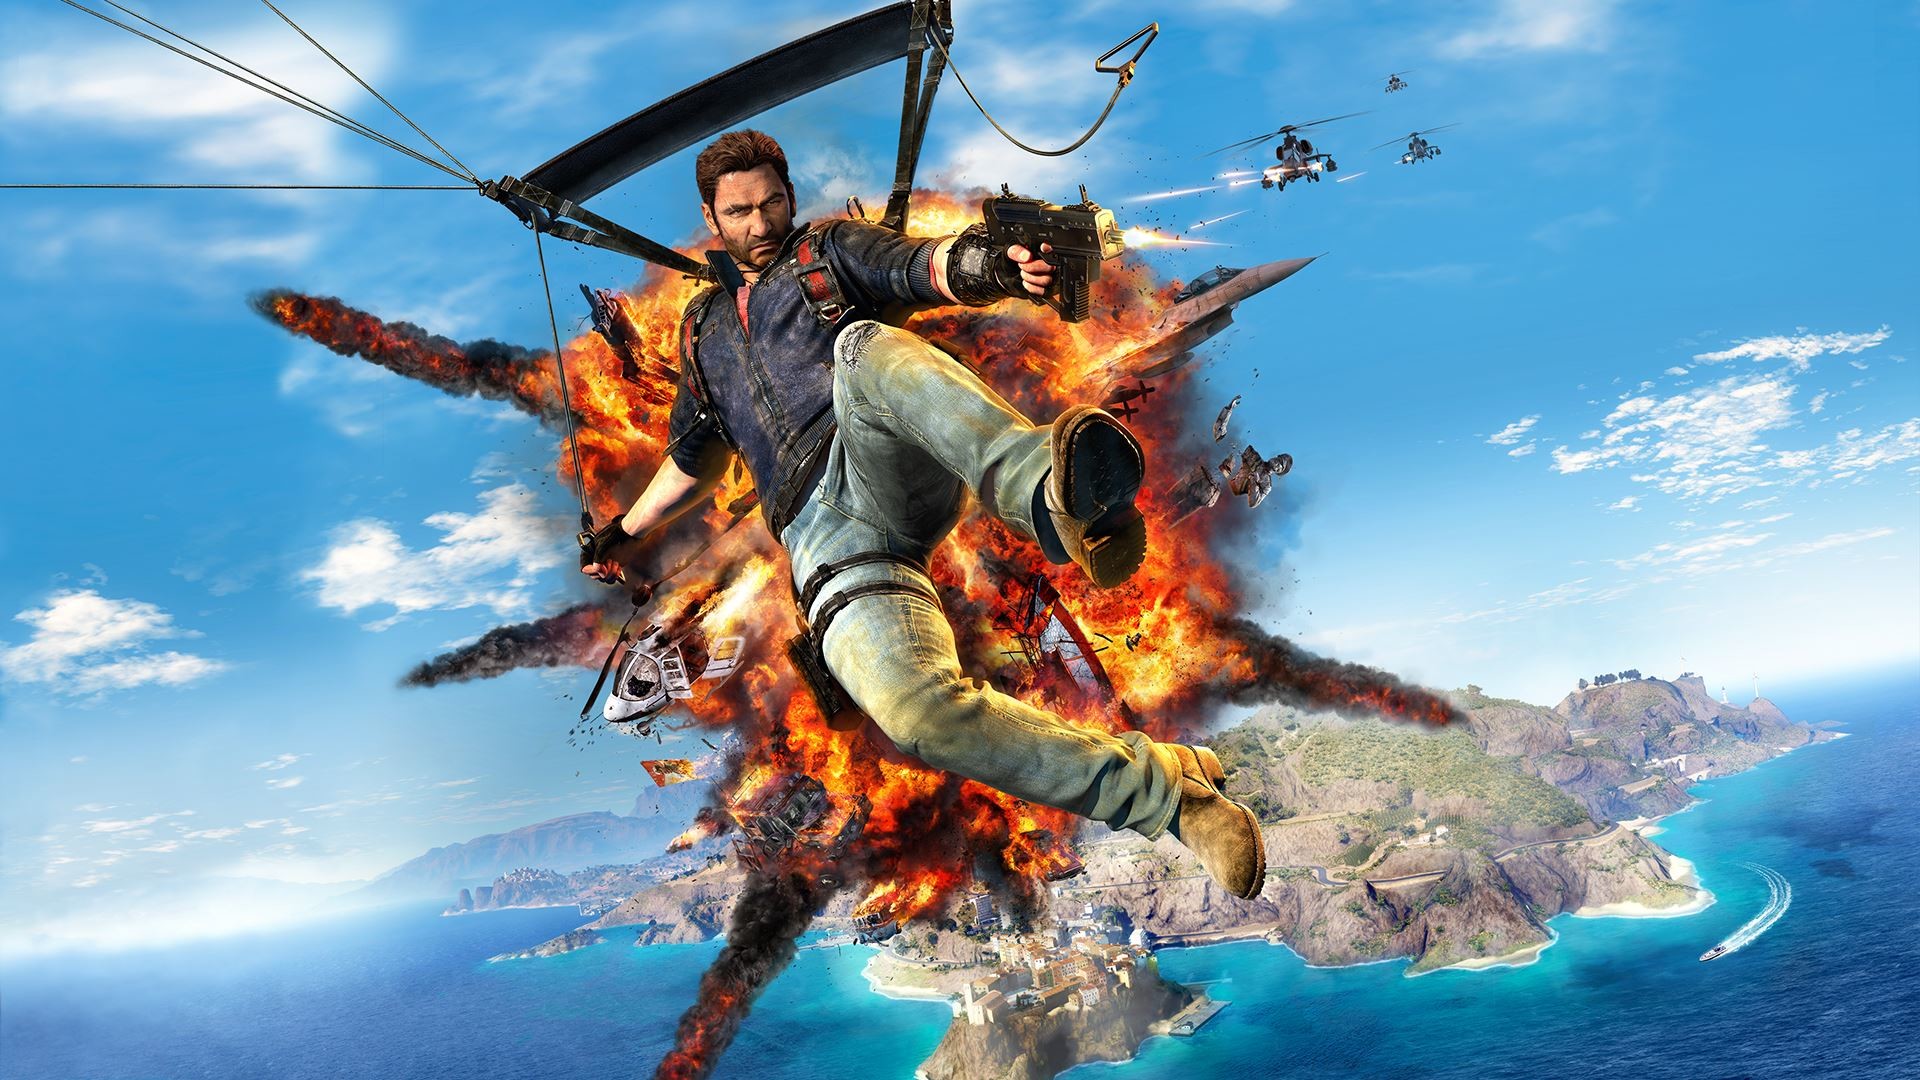 1920x1080 Destruction - the hallmark of Rico Rodriguez Wallpaper from Just Cause 3